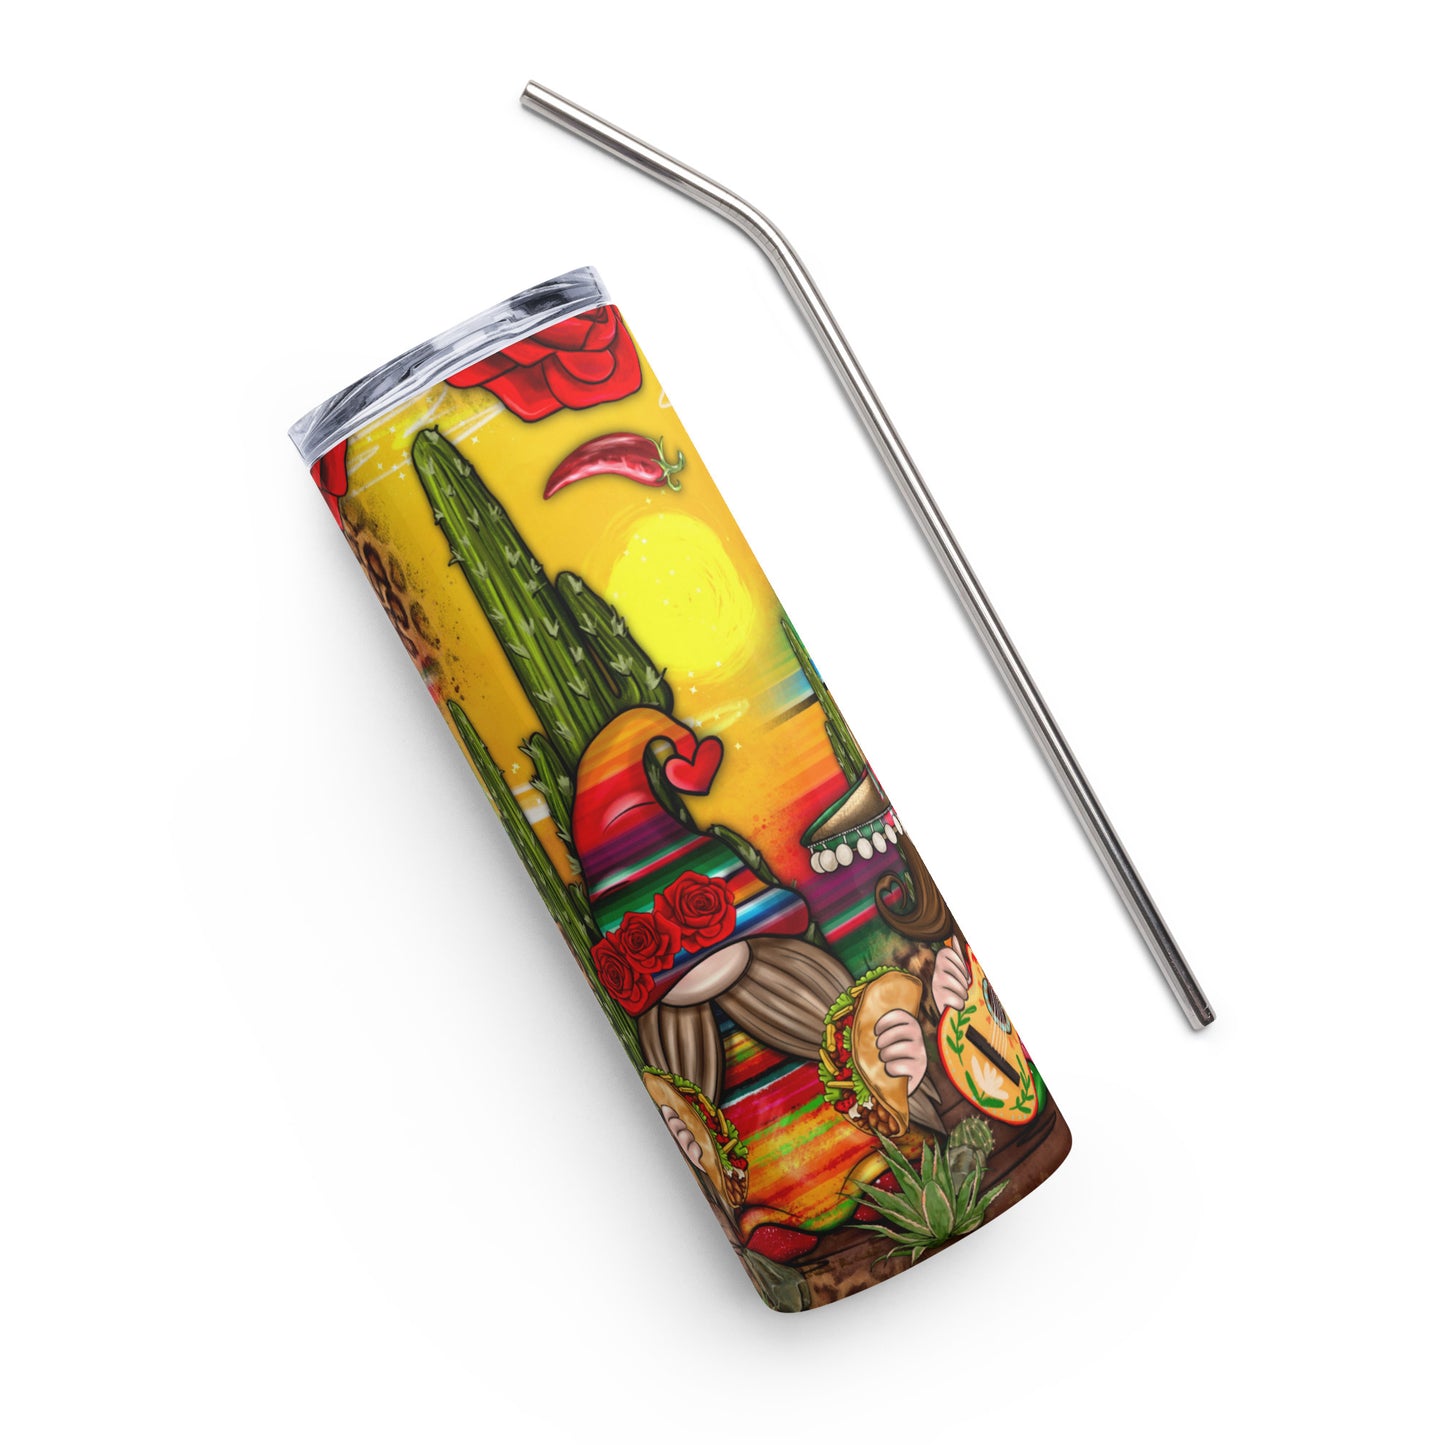 Mexican Gnomes Fiesta Stainless steel tumbler